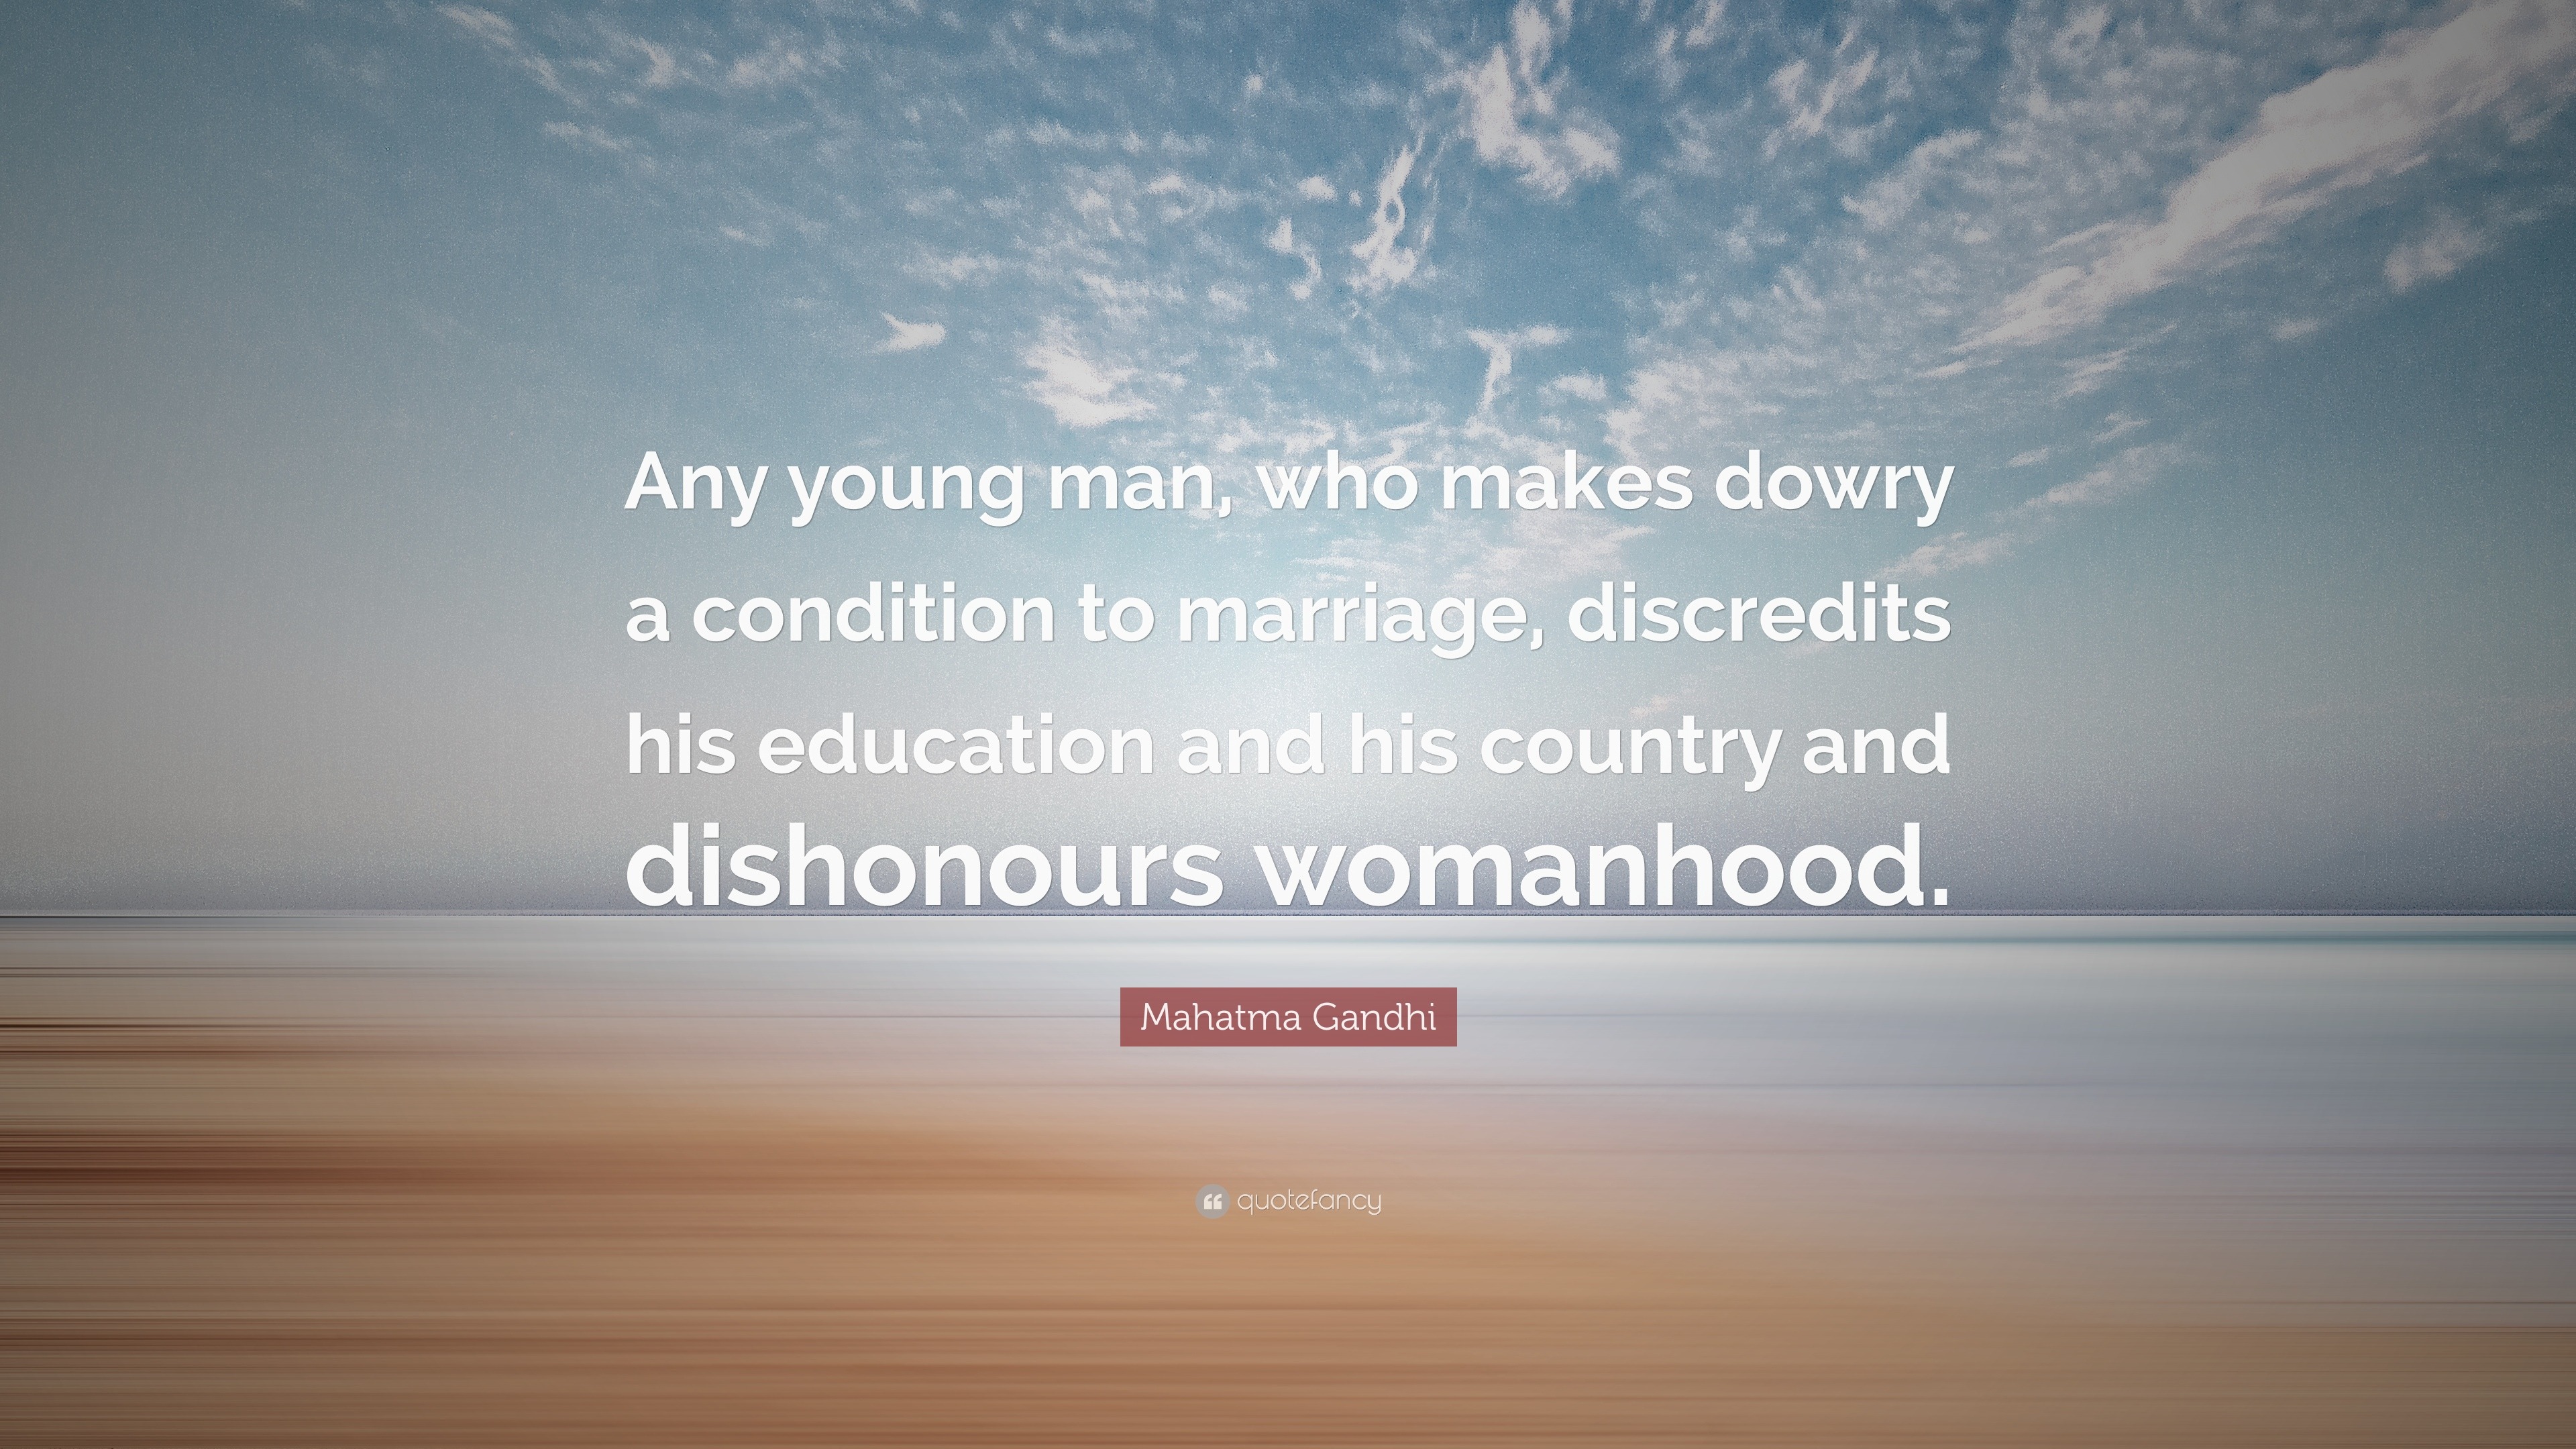 Mahatma Gandhi Quote: "Any young man, who makes dowry a ...